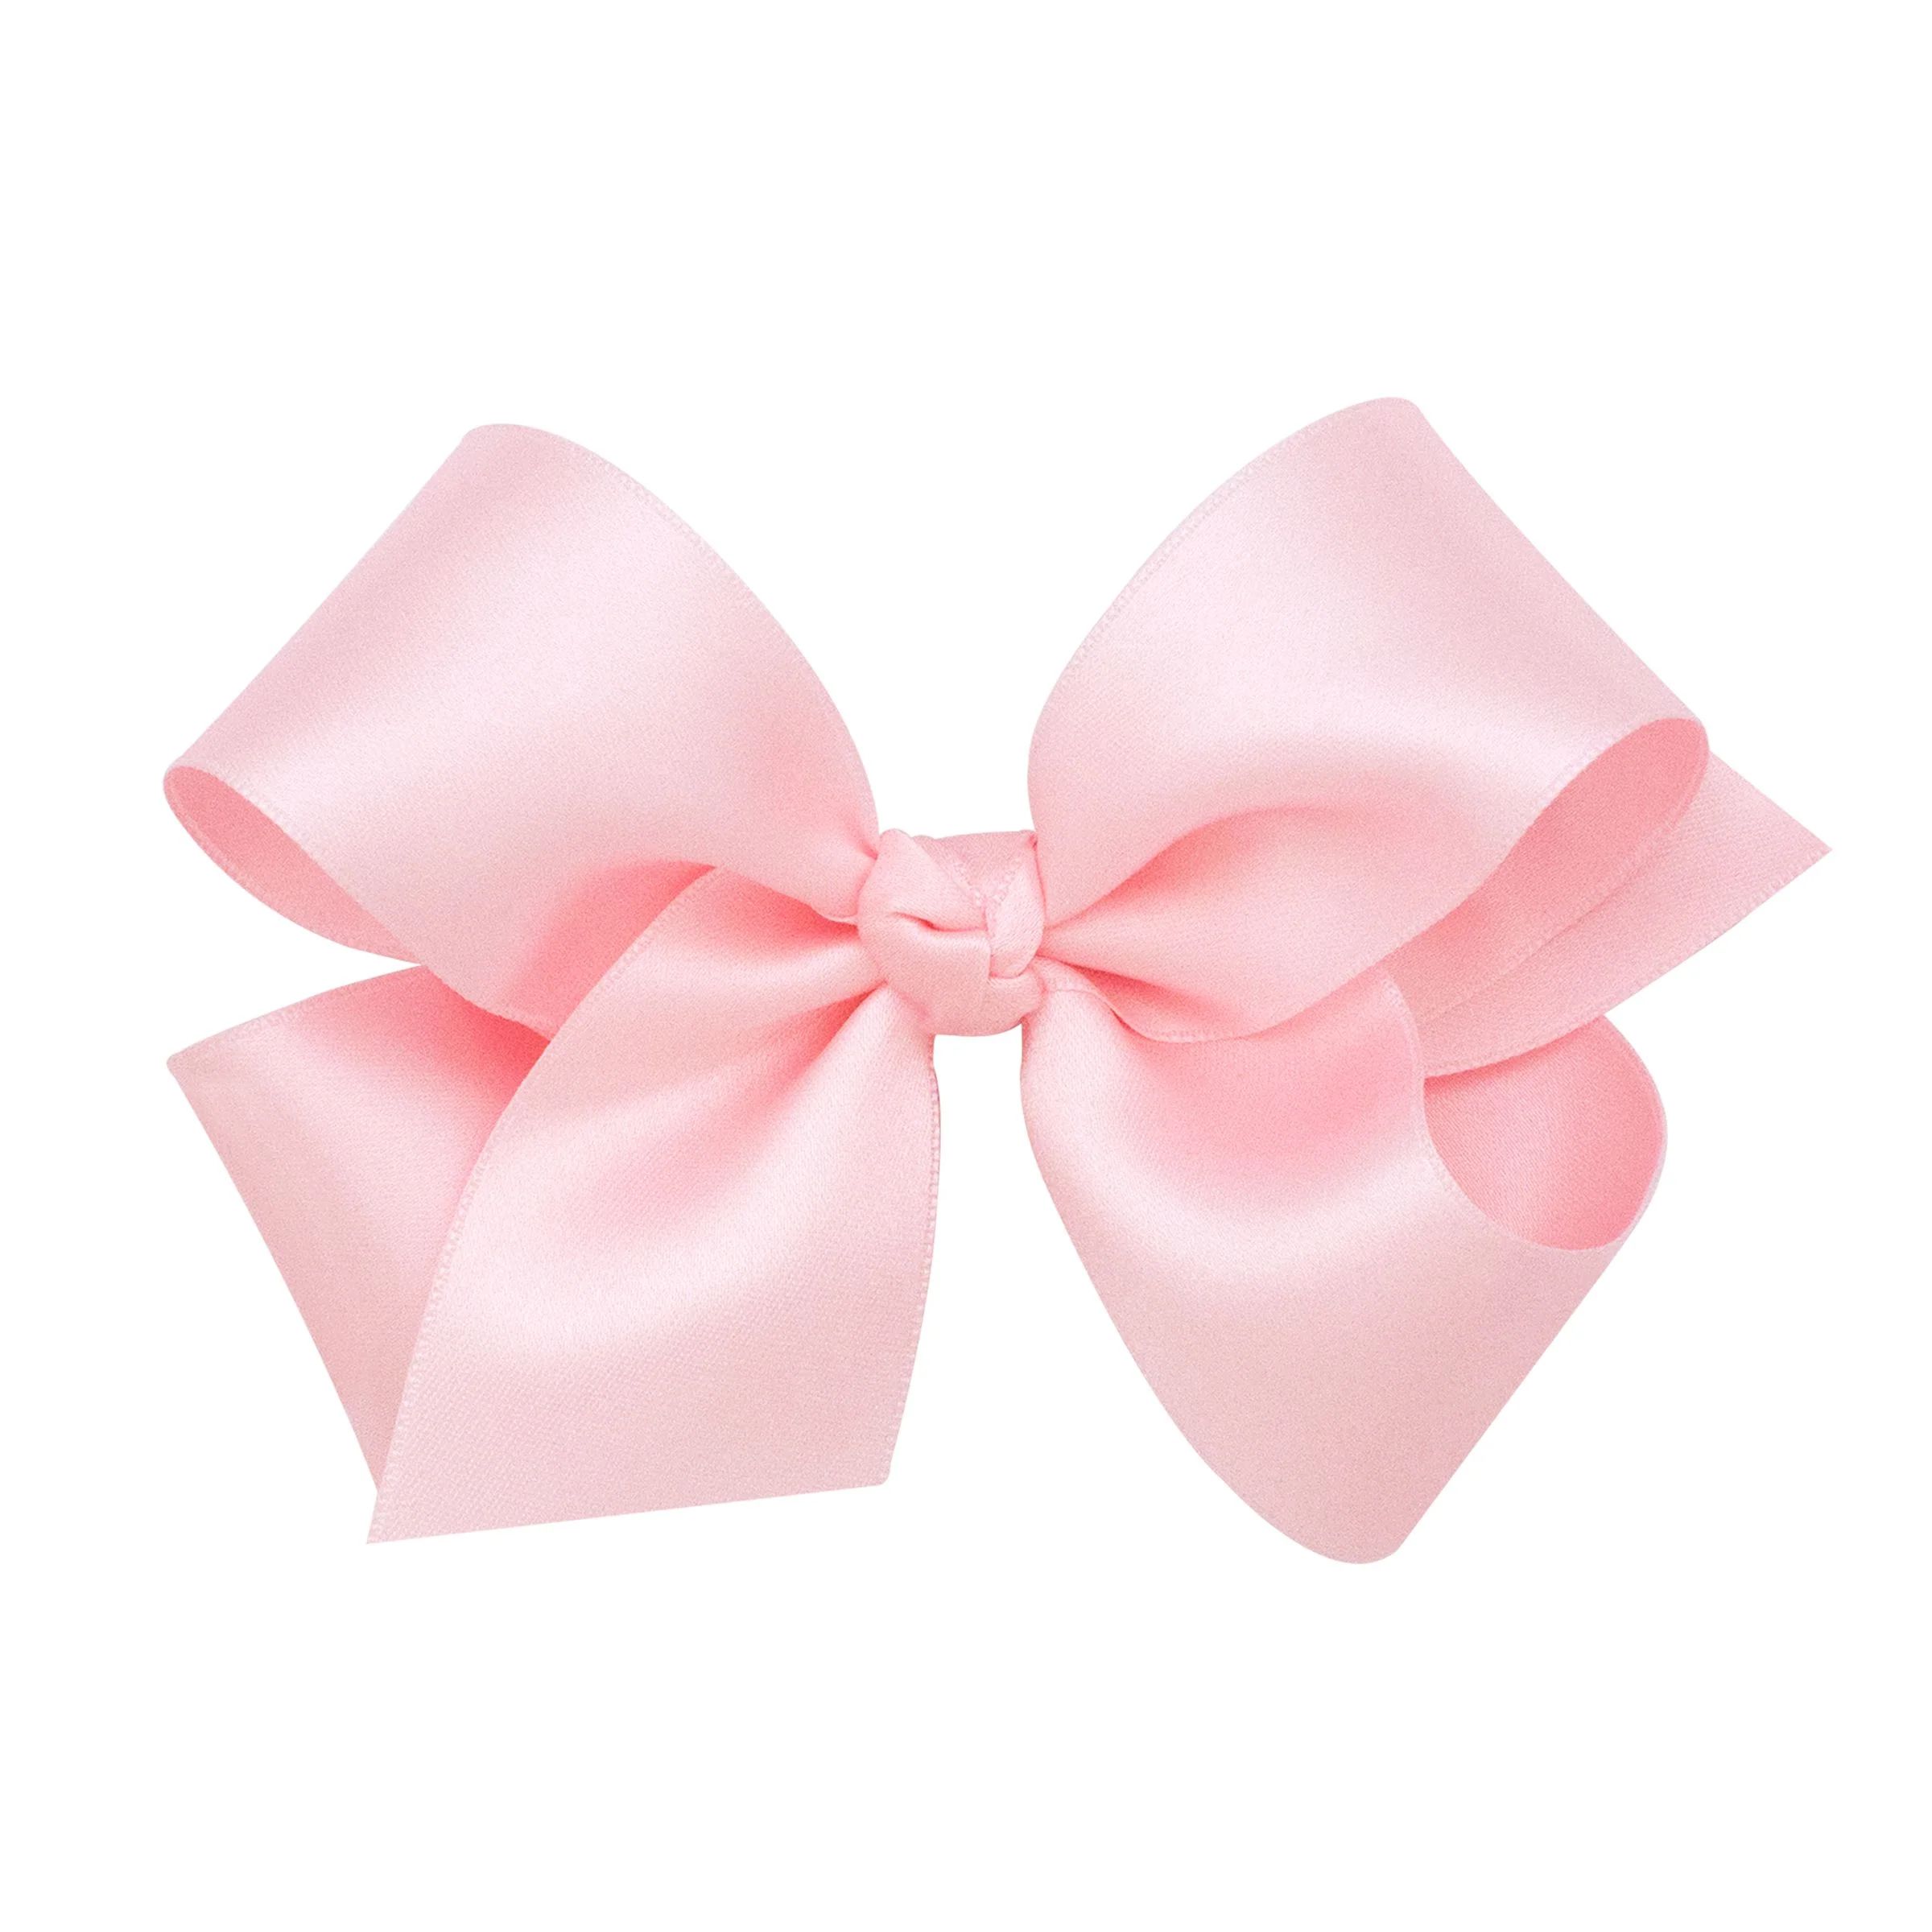 Wee Ones King French Satin Bow with Center Knot | JoJo Mommy